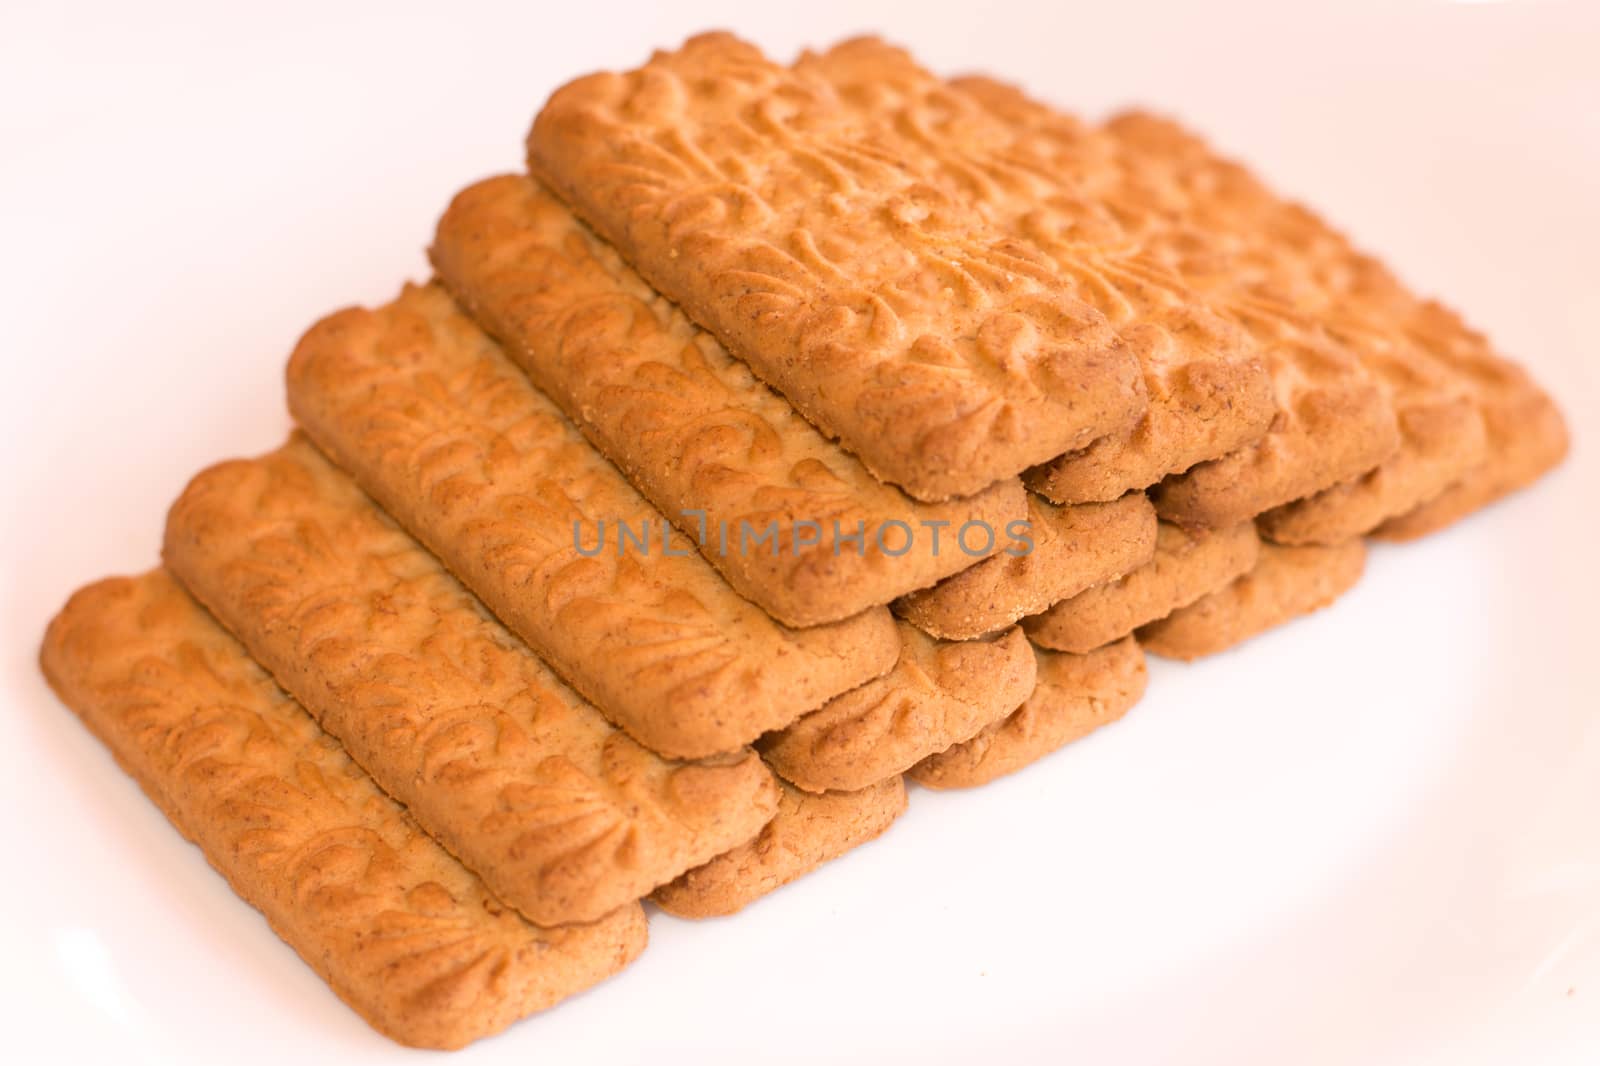 Fifteen biscuits put on a pyramid shape, isolated on white background.